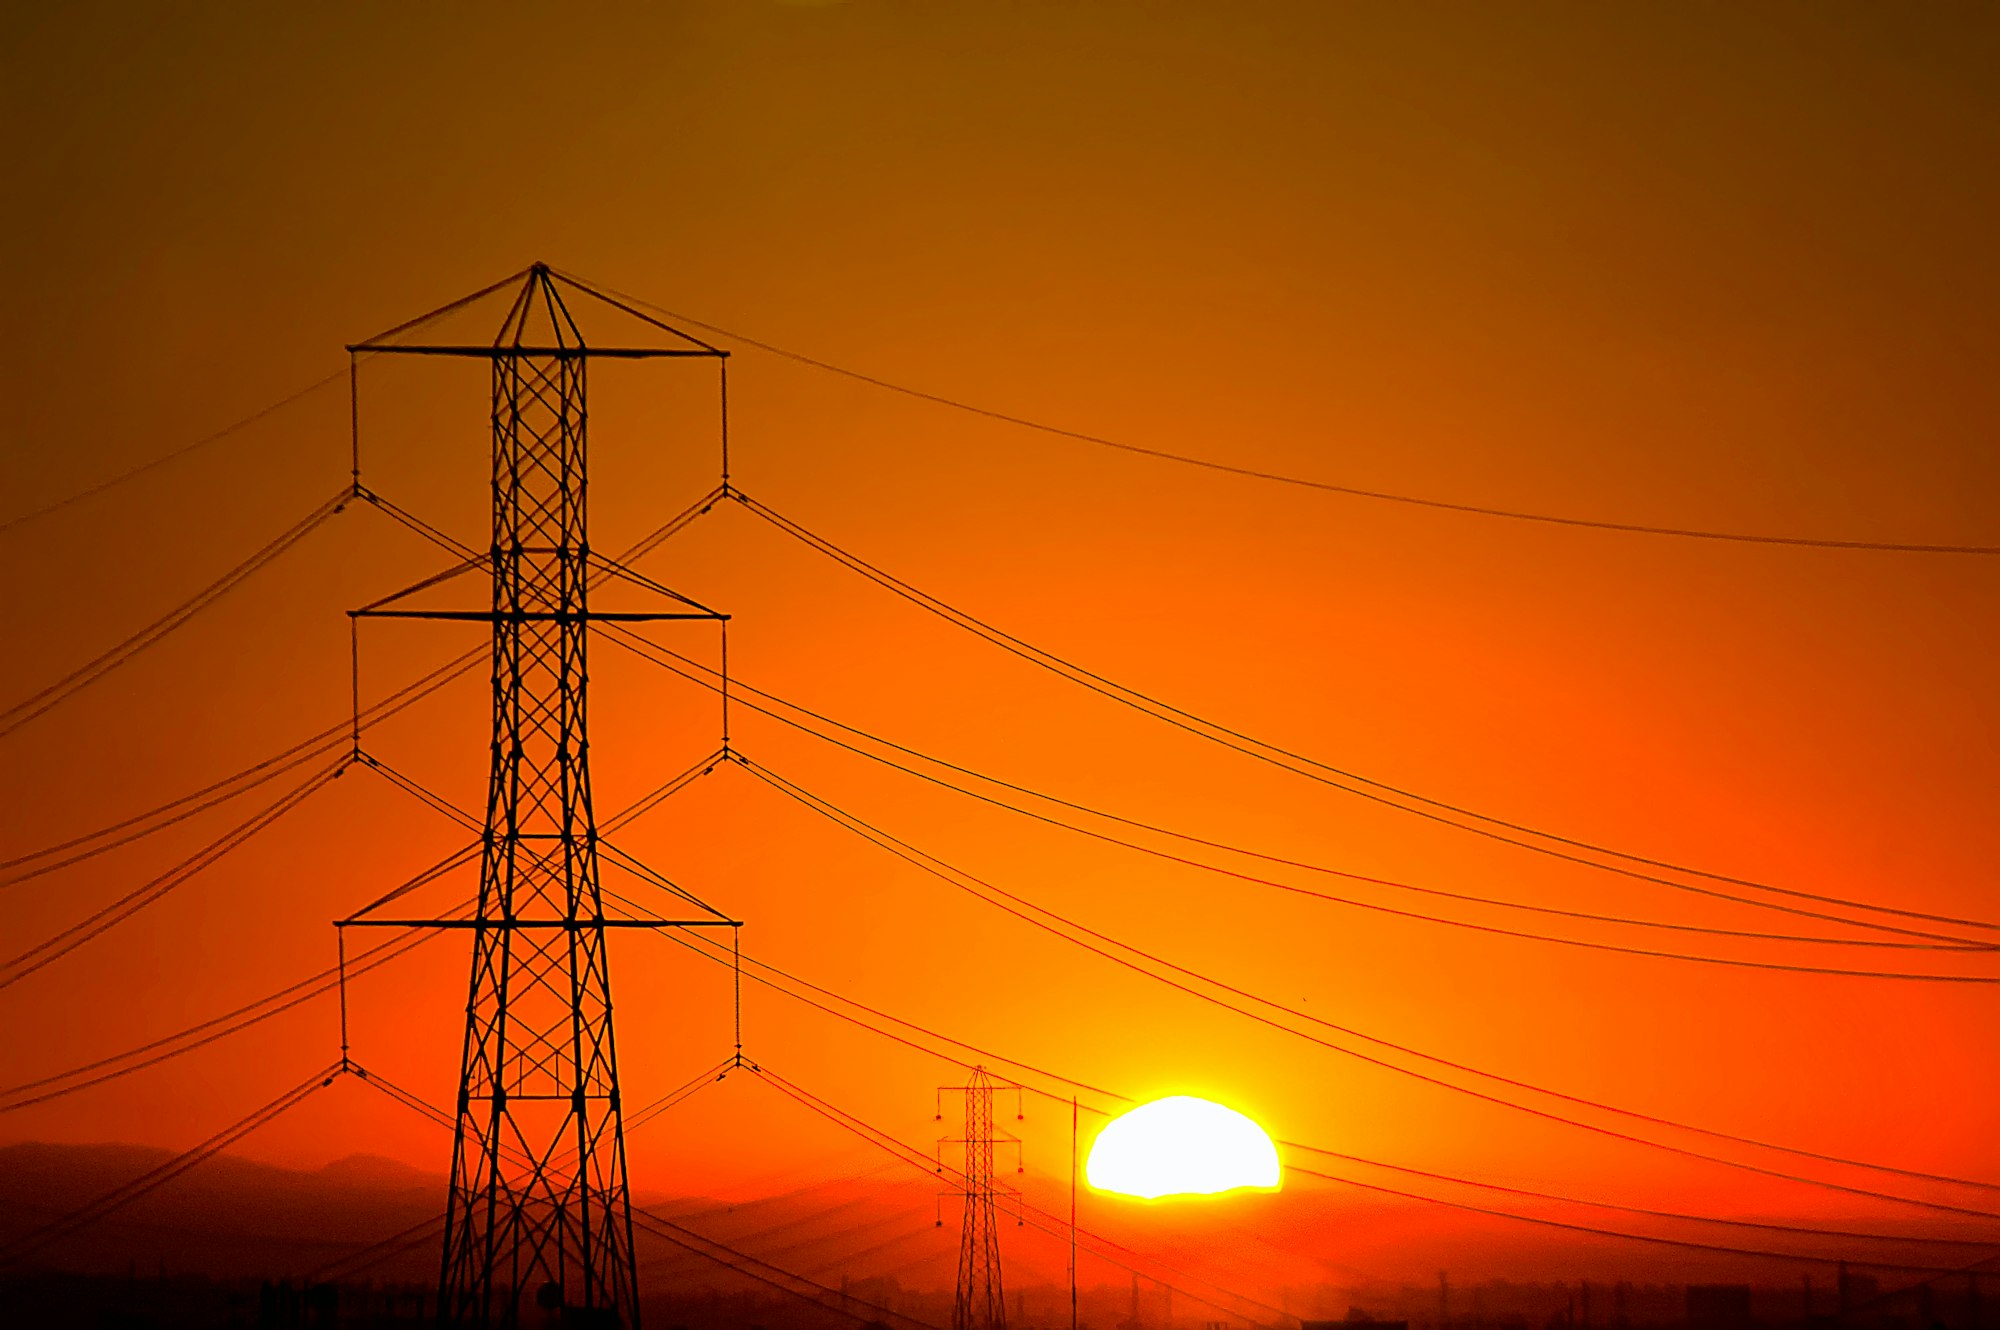 Burkina Faso plans to double its electricity generating capacity by 2020